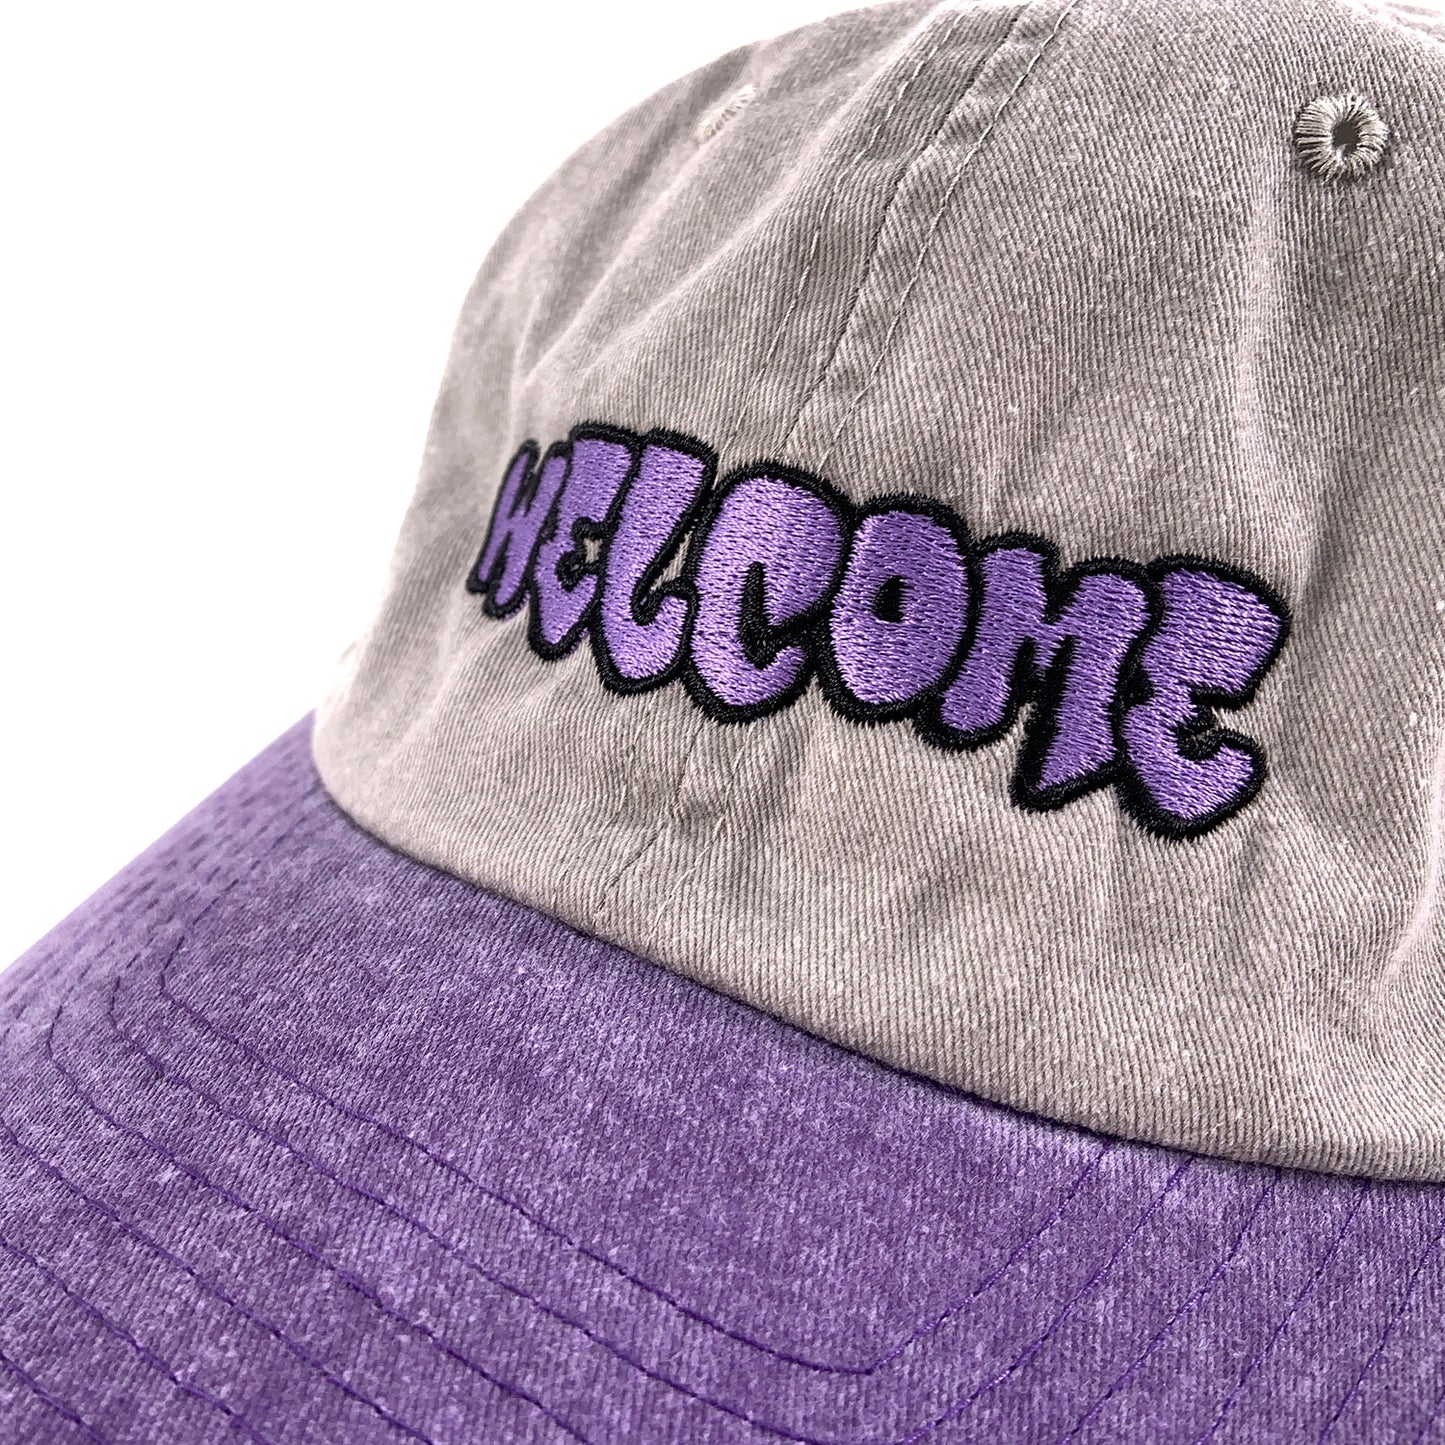 Welcome Bubble Stone-Washed Hat - Khaki / Plum - Prime Delux Store